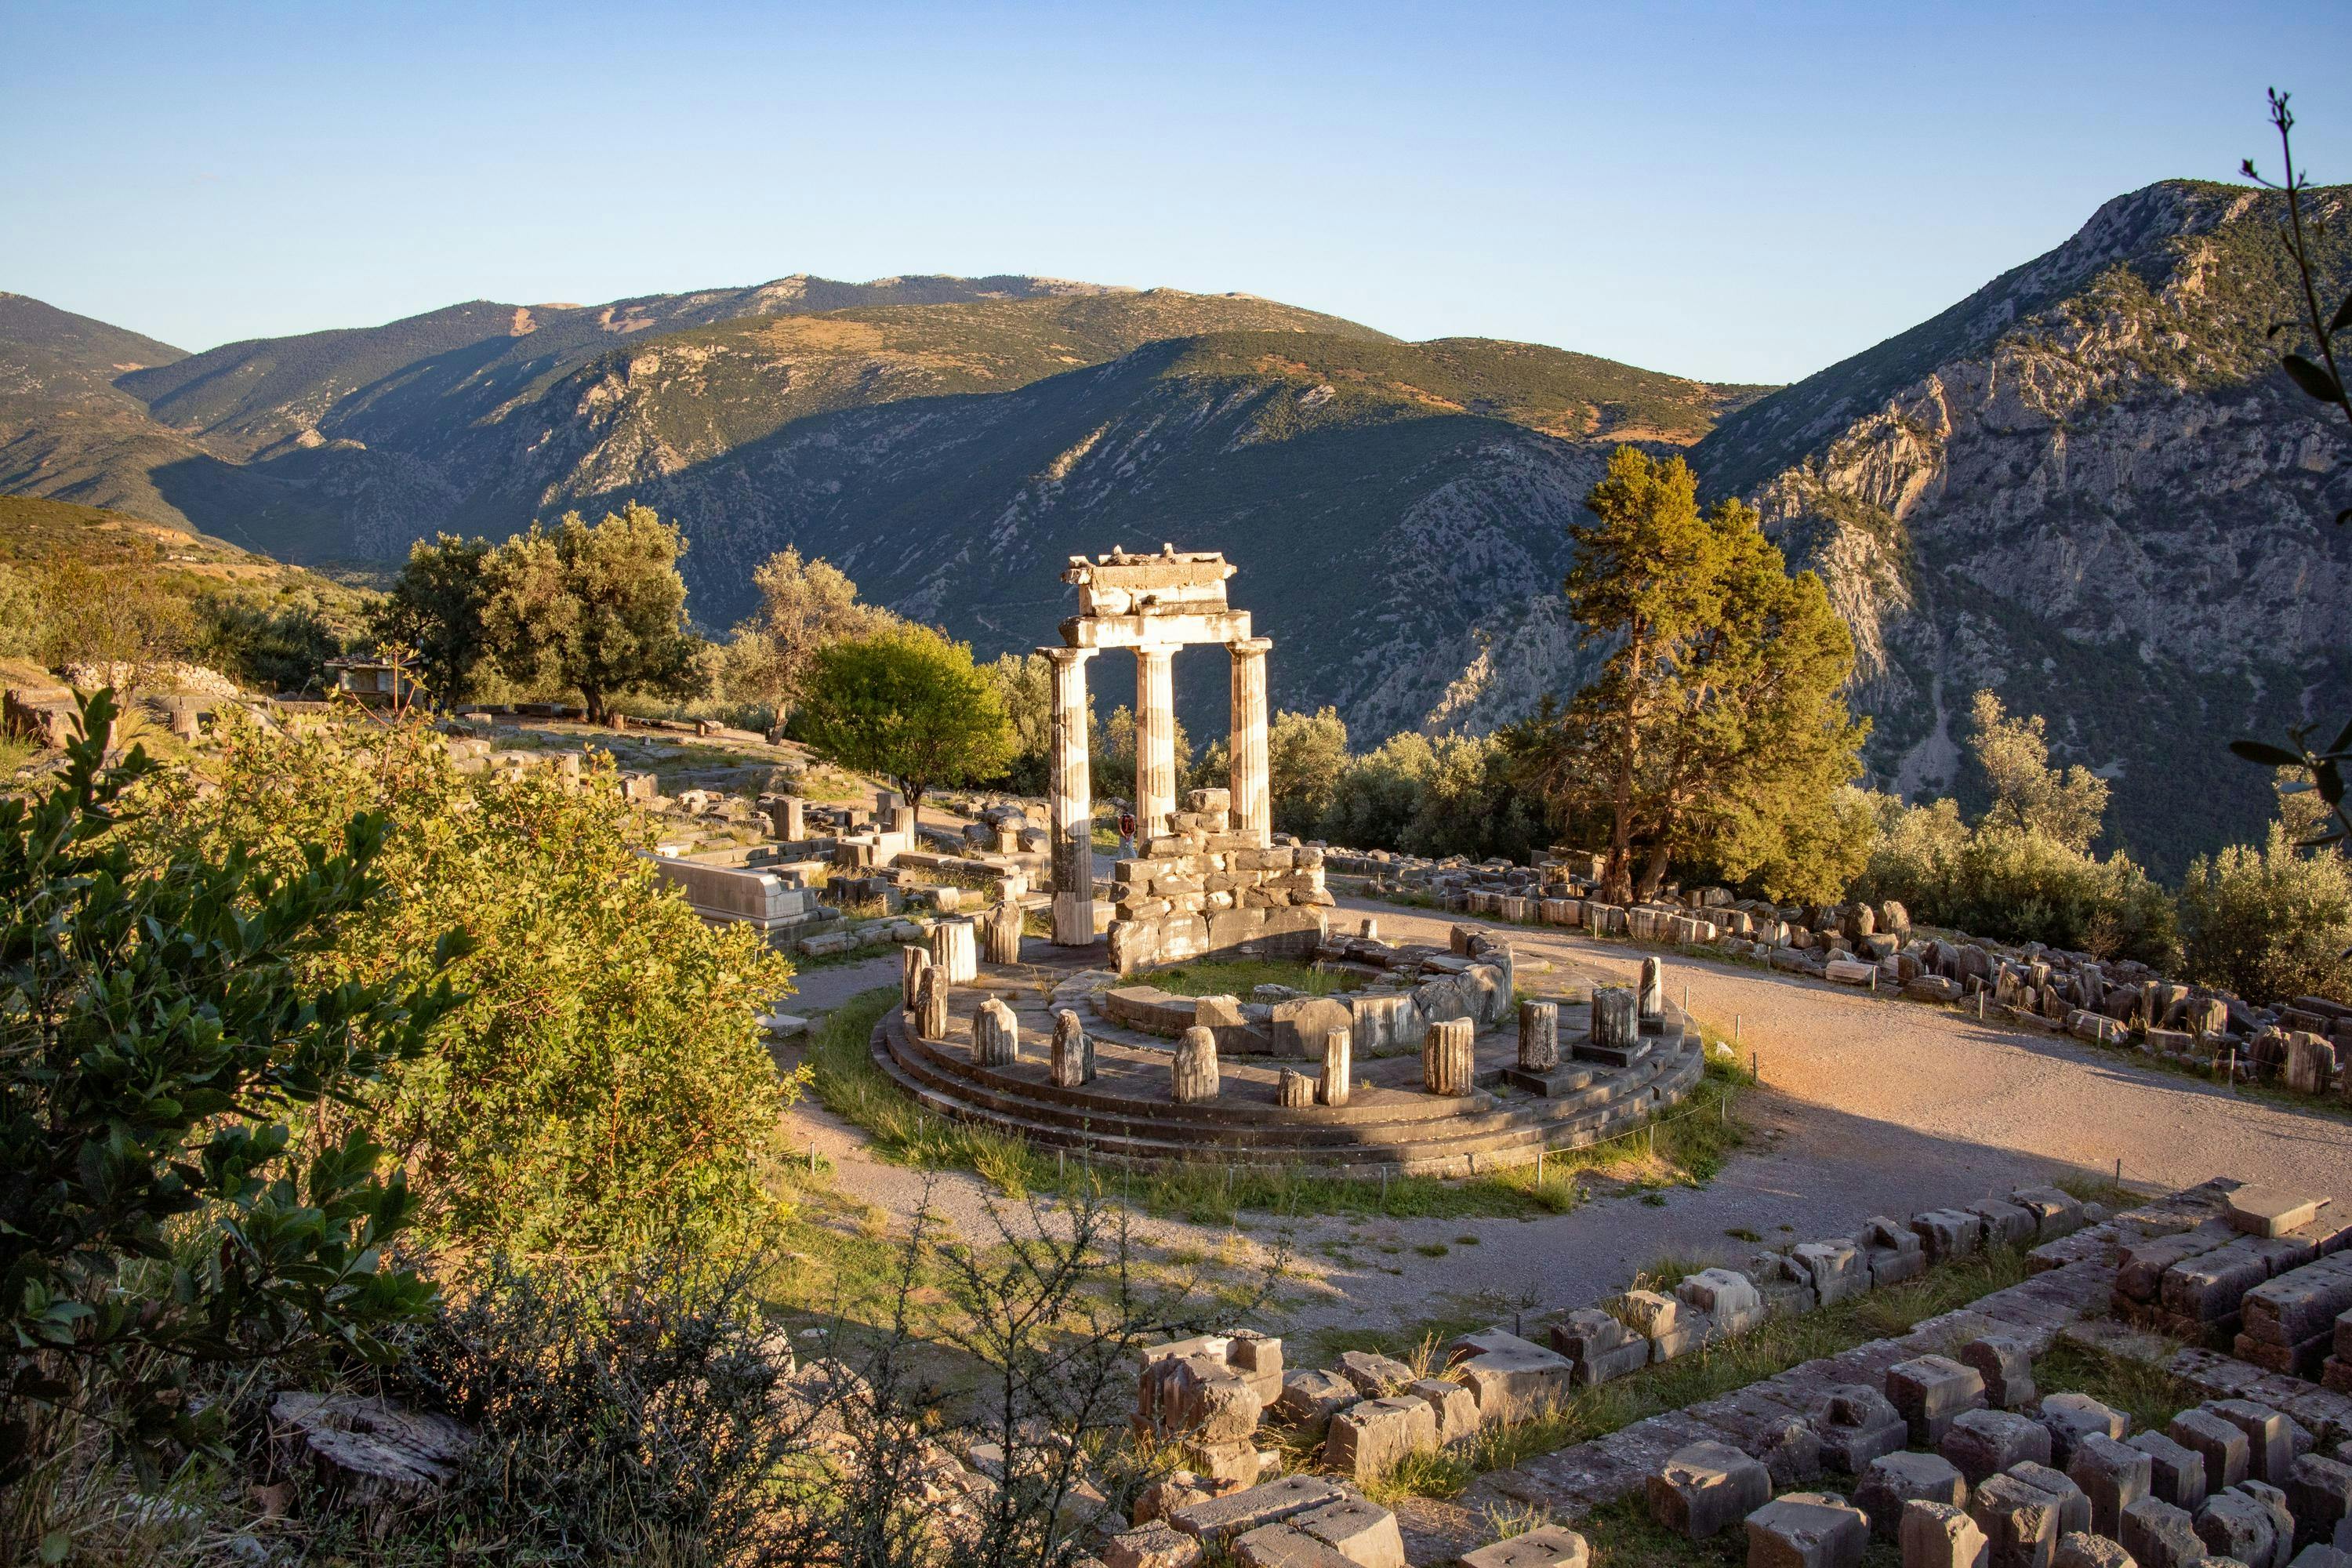 This image features the Temple of Artemis in Delphi, ruins of ancient Greece